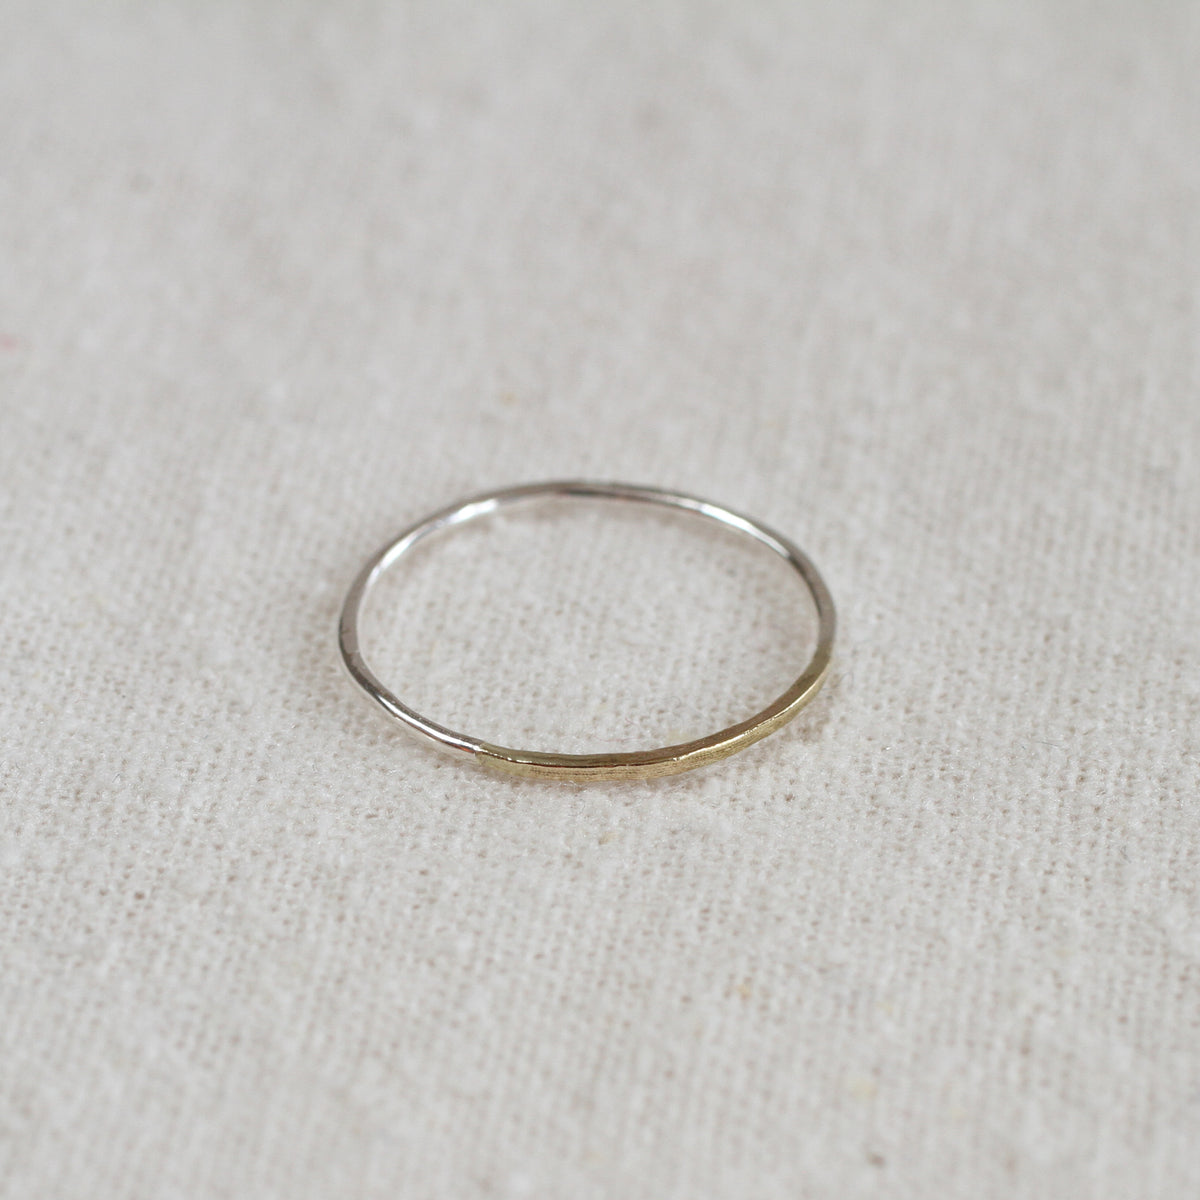 spruce needle ring – Thicket